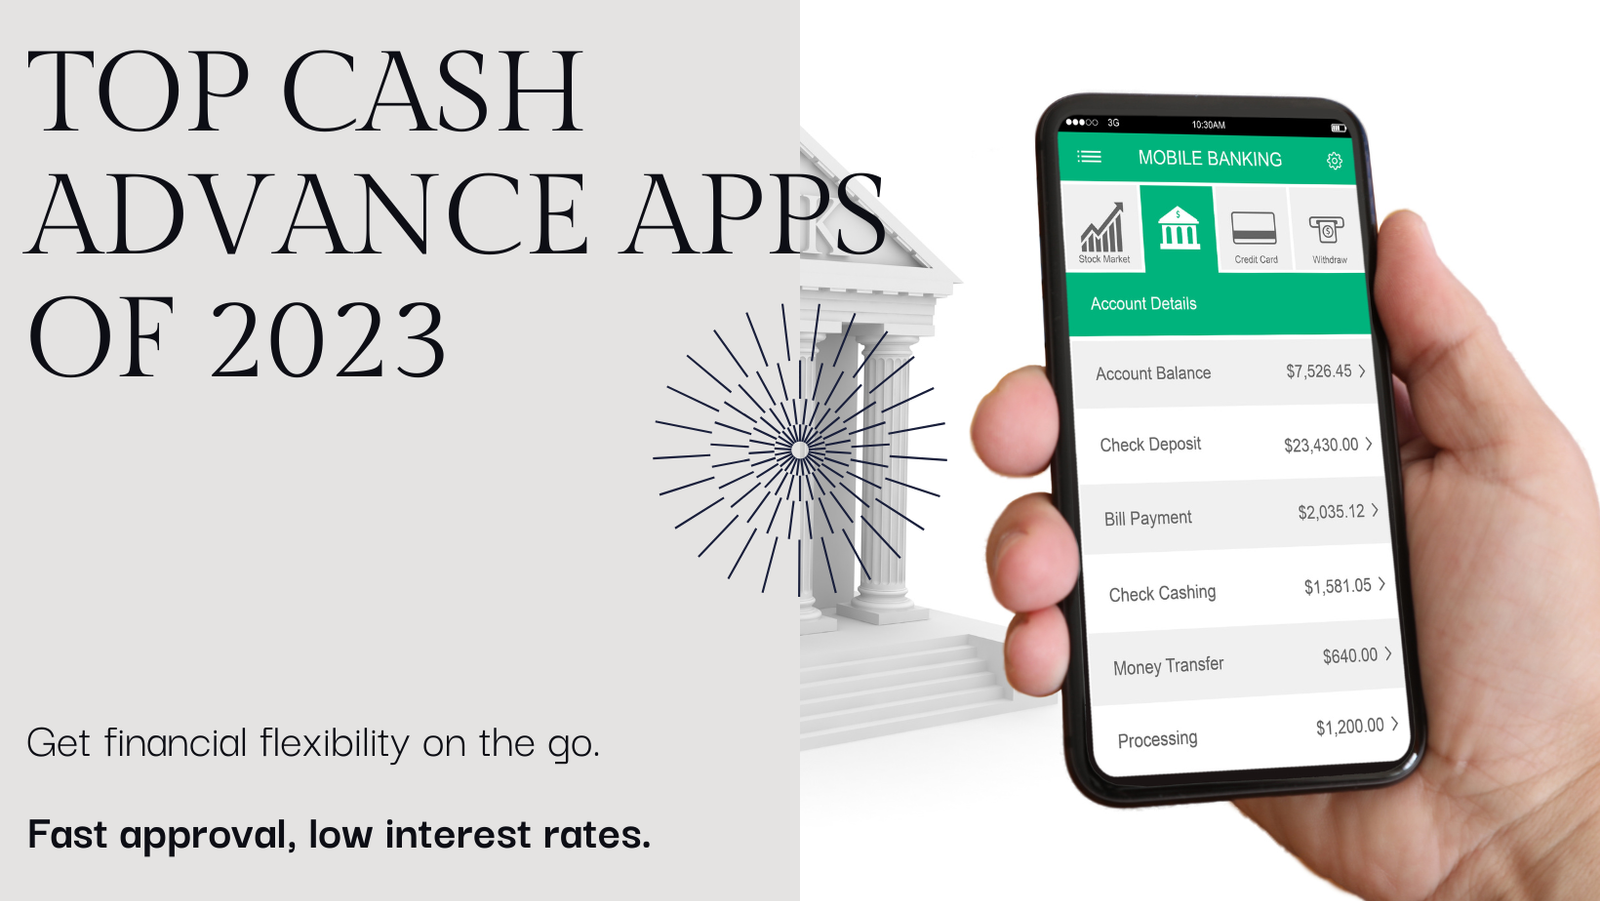 Top Cash Advance Apps for Financial Flexibility in 2023